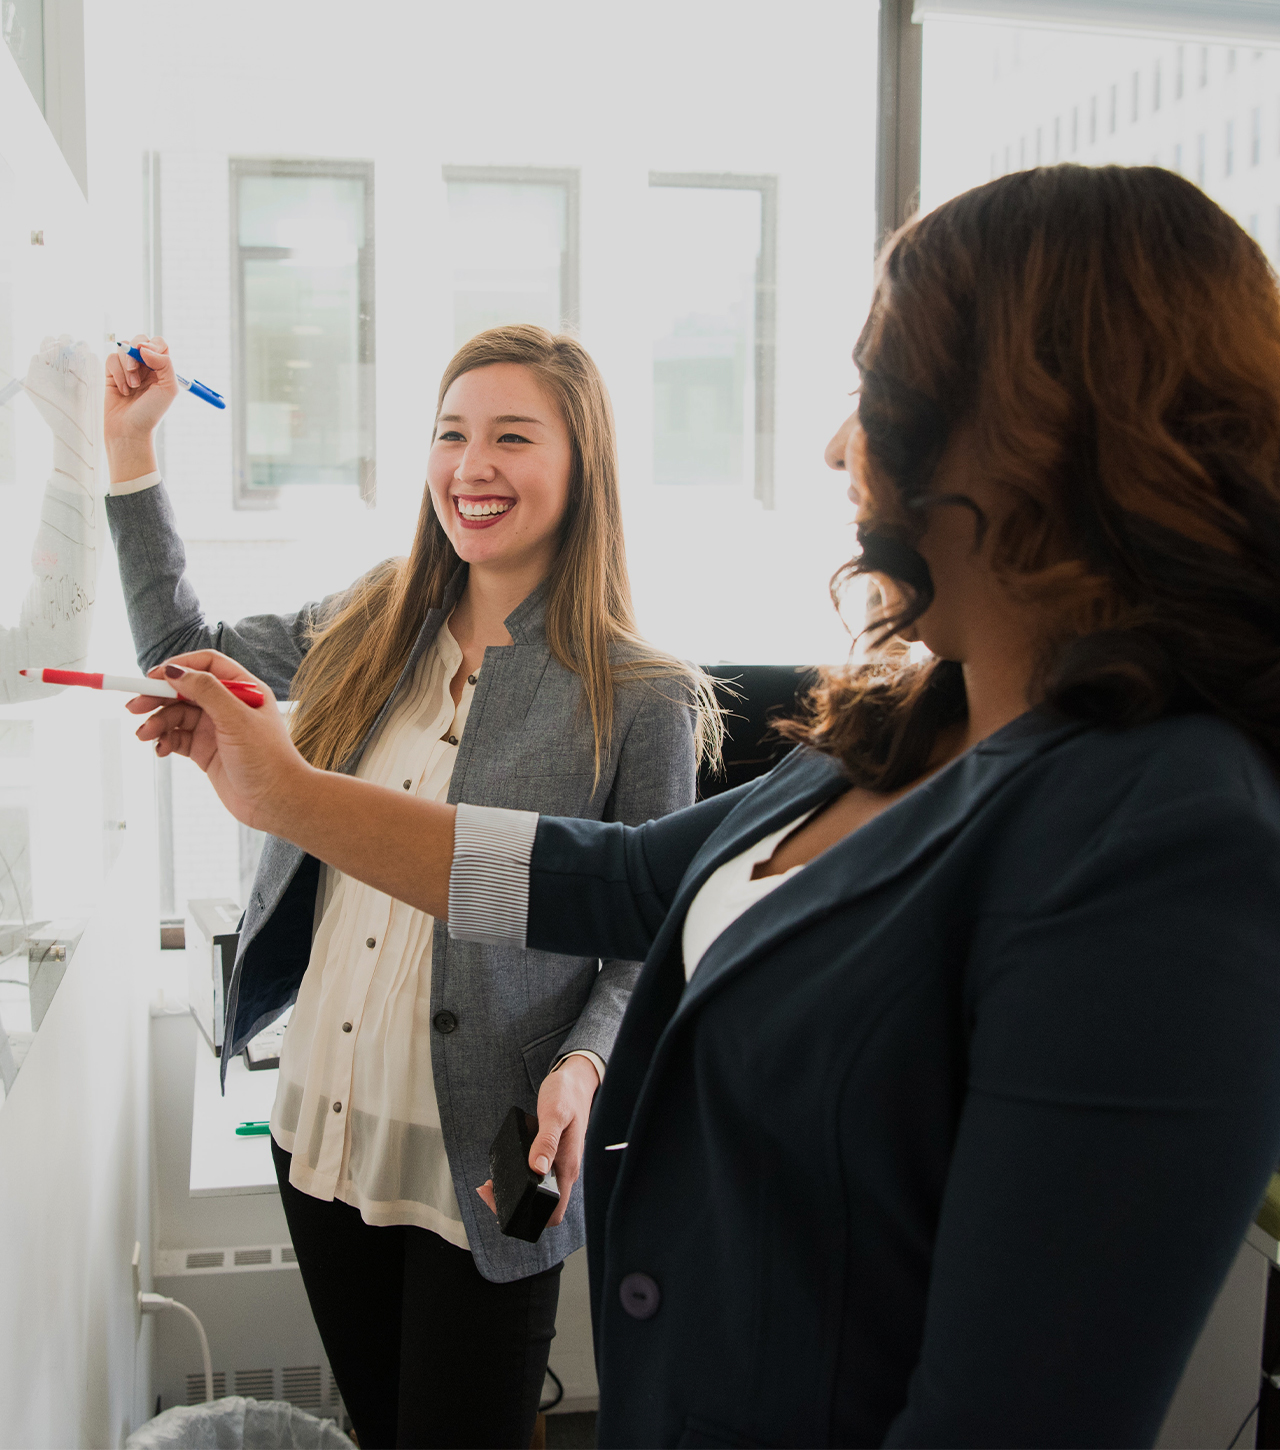 Two business women draw up ideas on a whiteboard